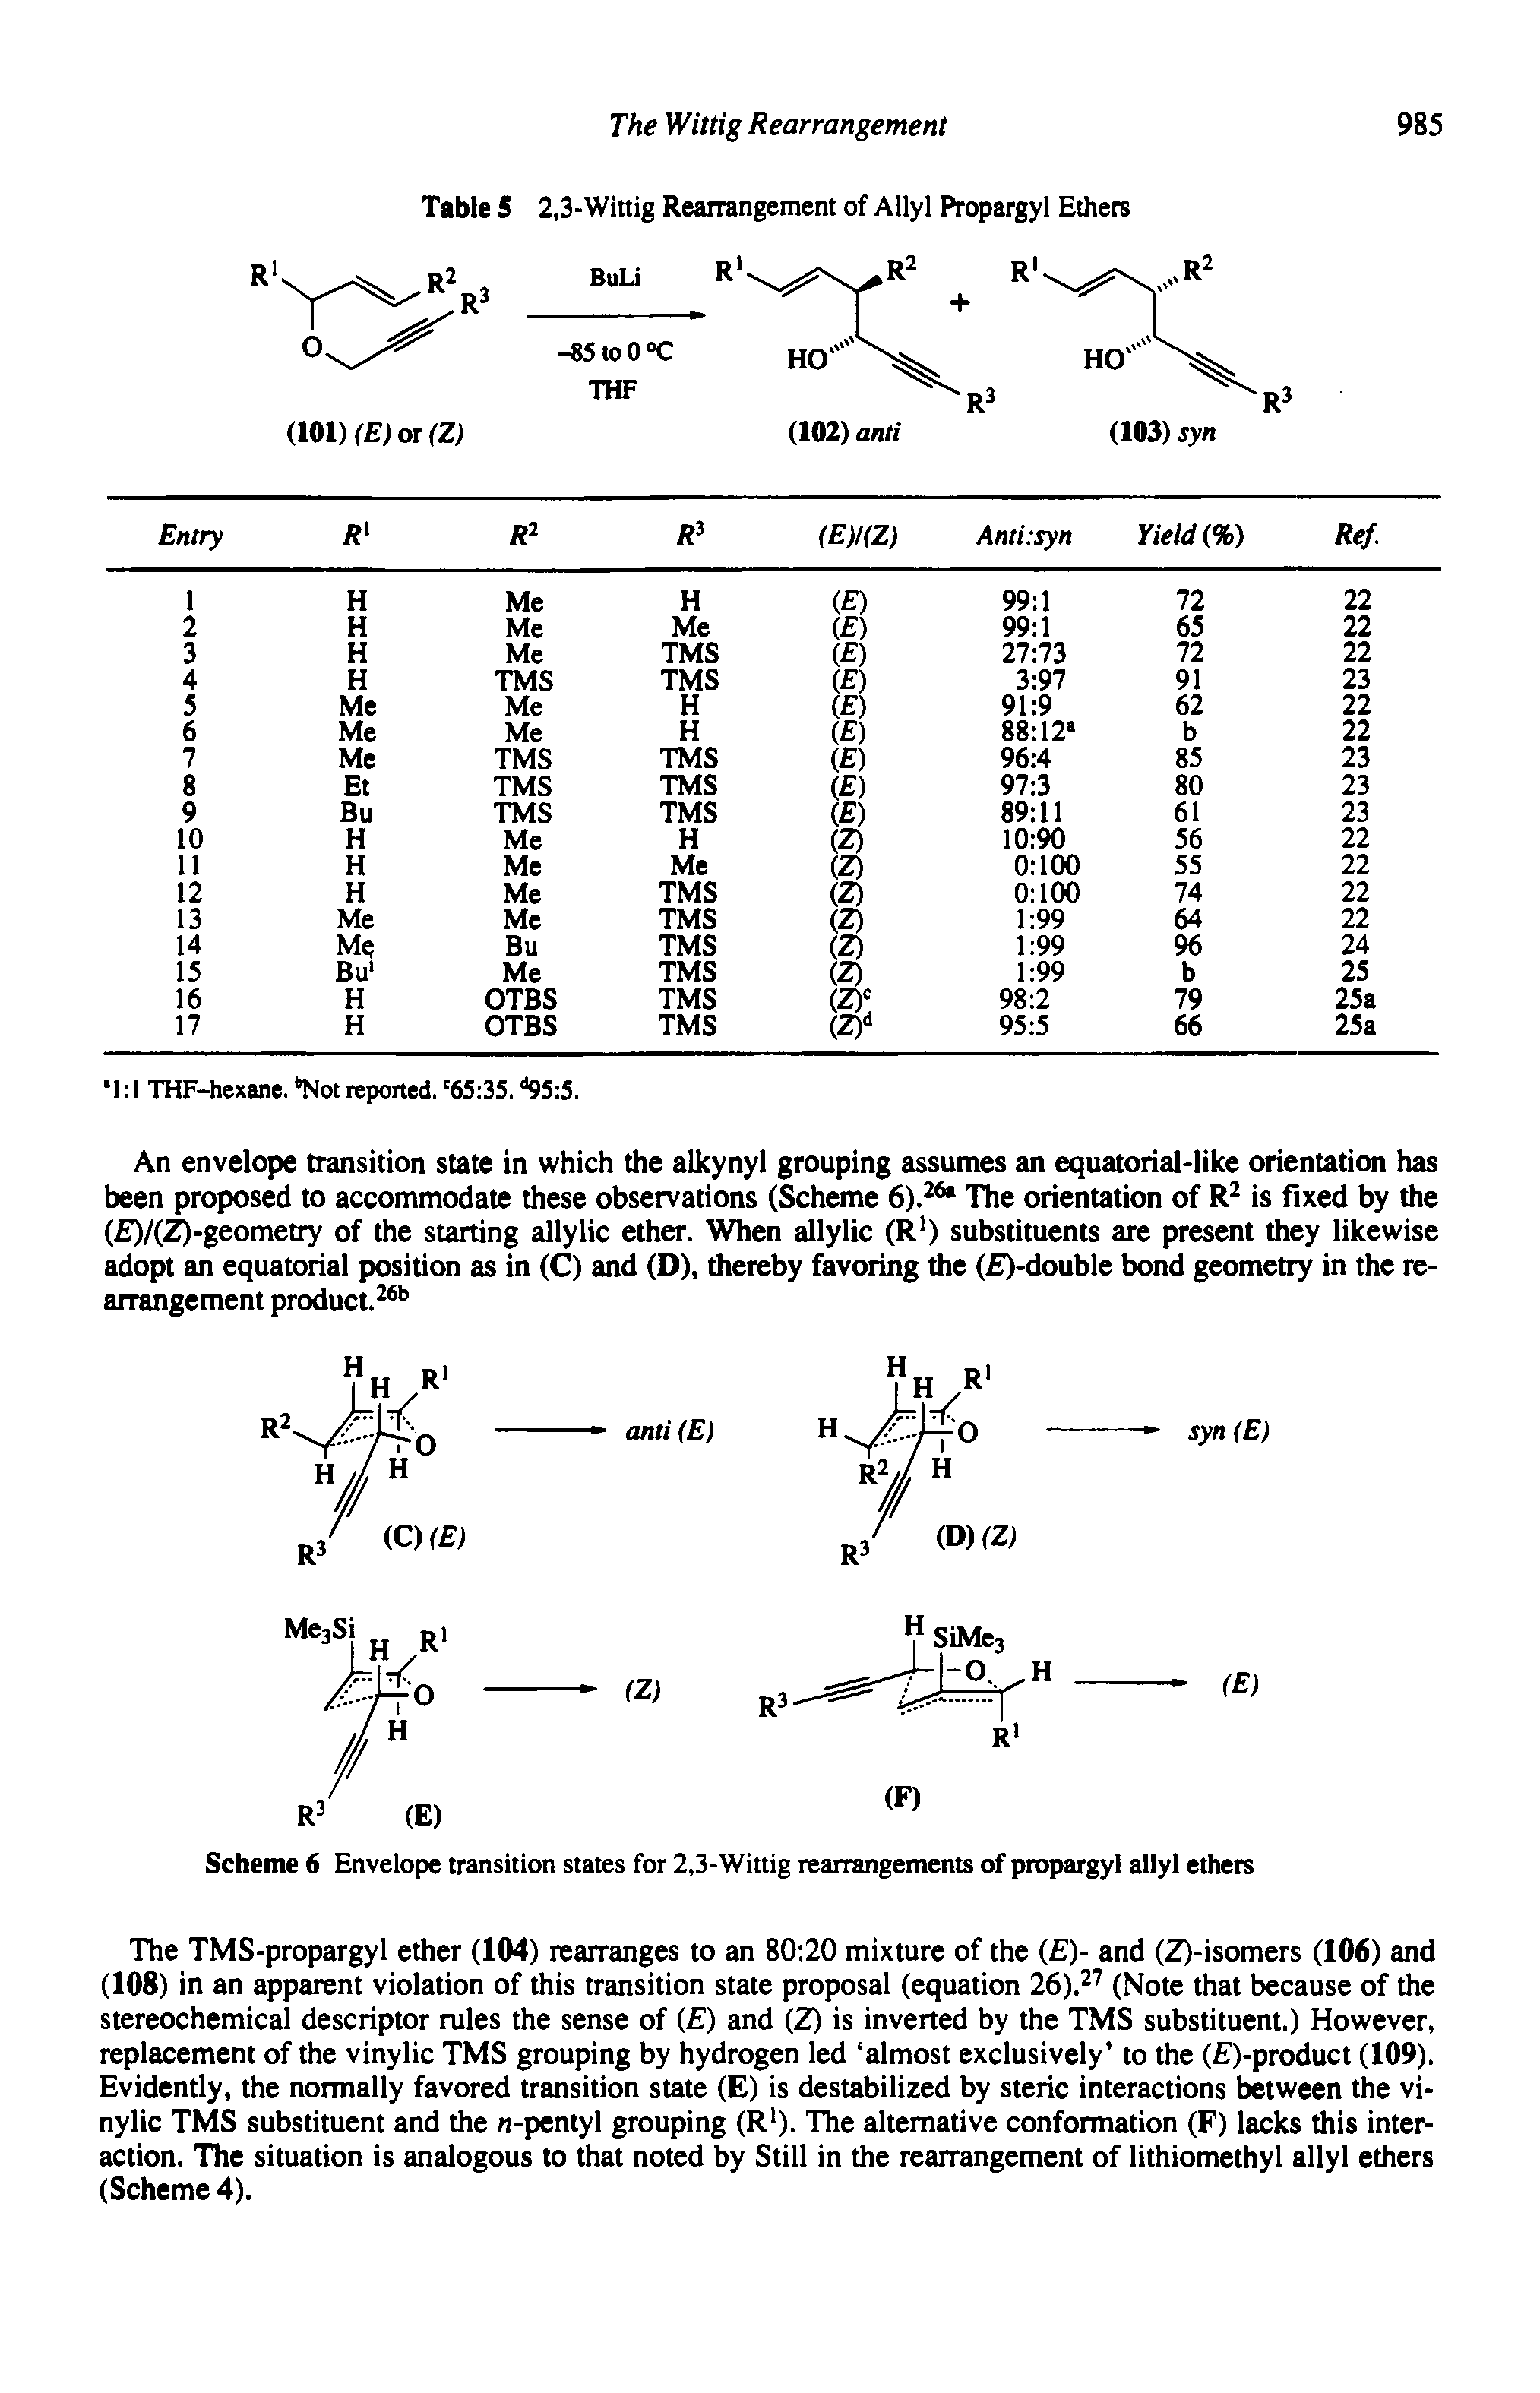 Table 5 2,3-Wittig Rearrangement of Allyl Propargyl Ethers...